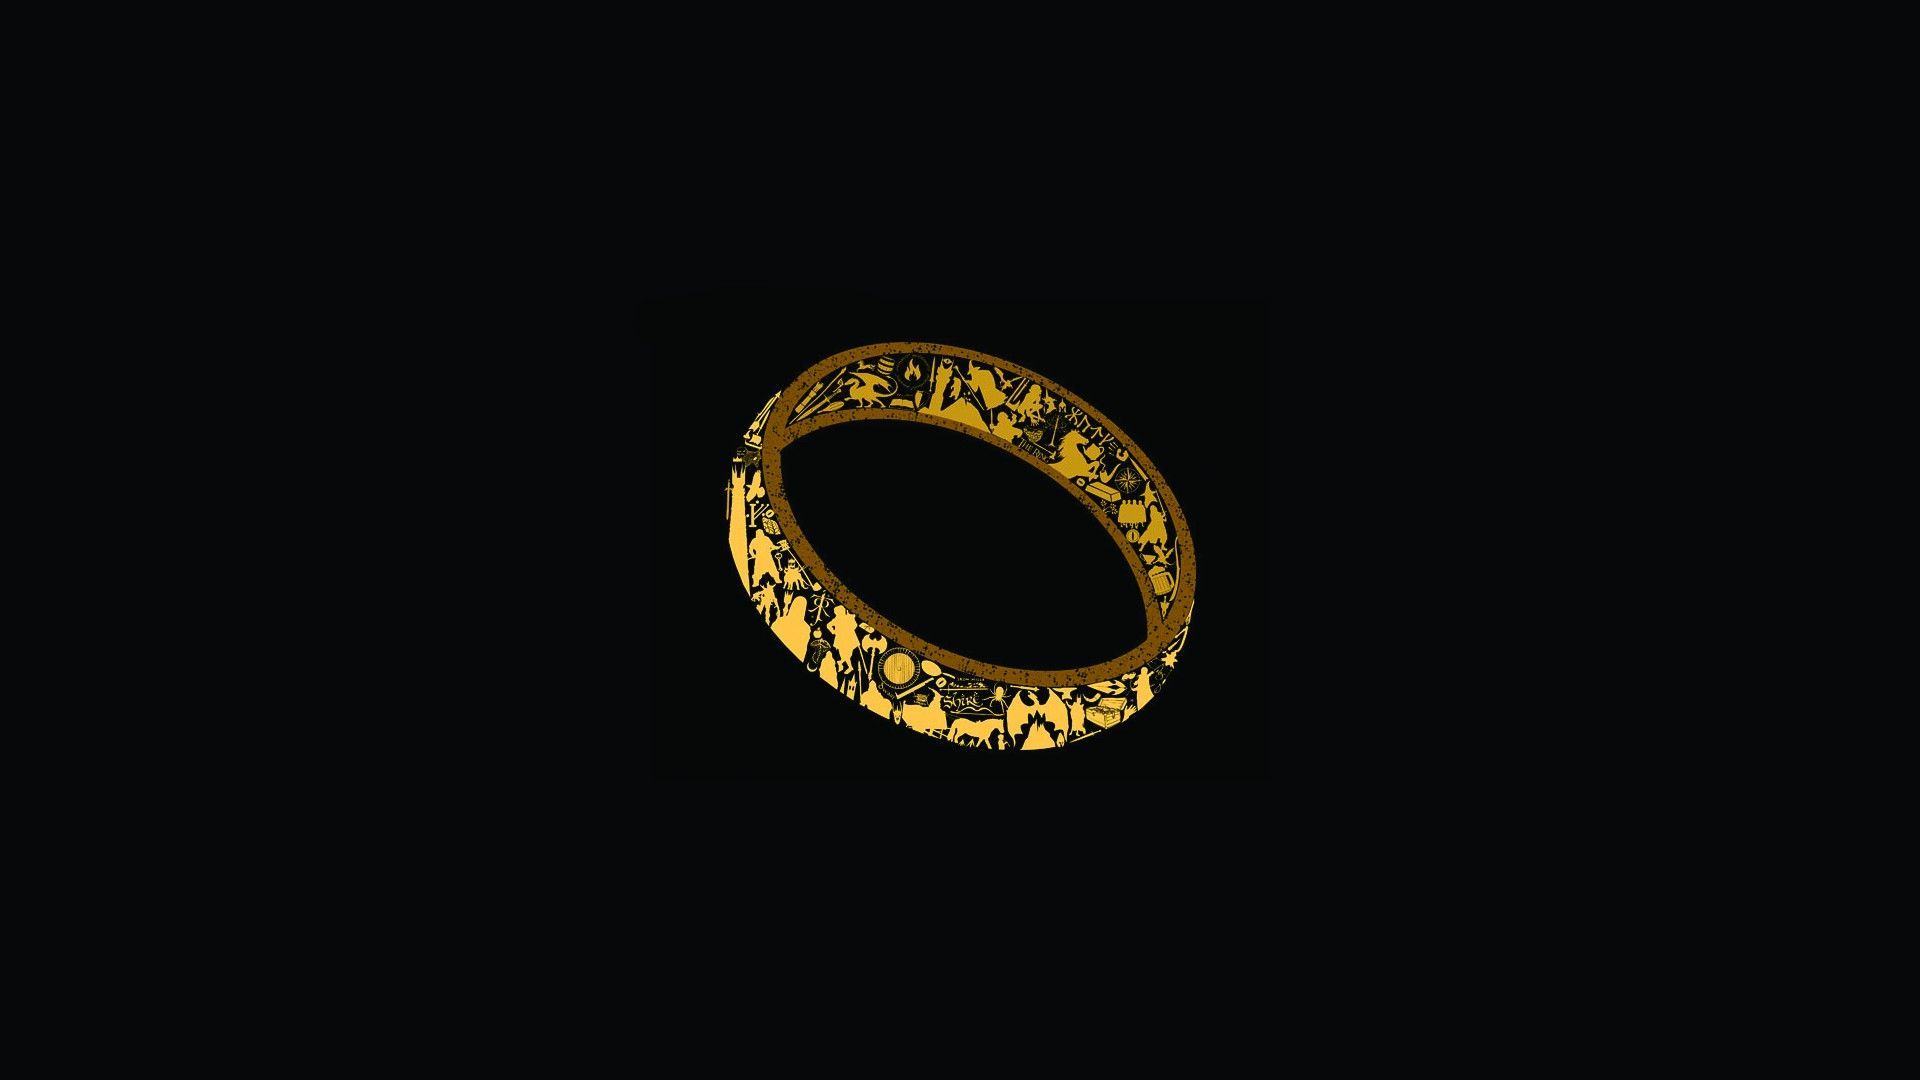 The Lord of the Rings The One Ring abstract geek minimalistic wallpaper. Minimal wallpaper, Minimalist wallpaper, Wallpaper